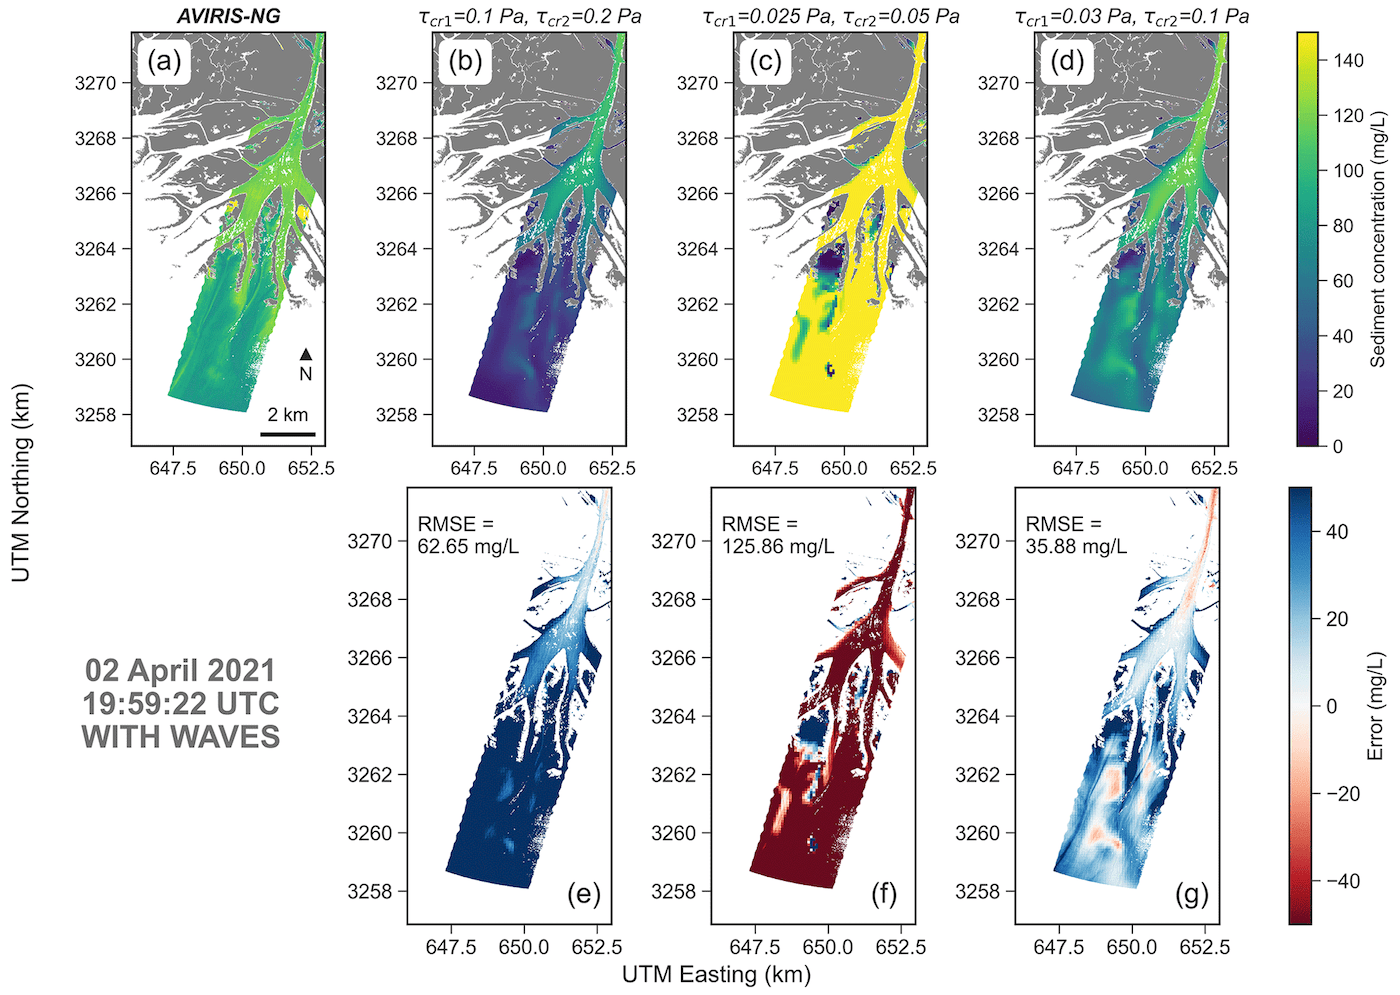 Comparison between AVIRIS-NG and the modeled sediment concentrations in the Wax Lake Delta with the effect of waves. Scenarios show model results with different critical shear stresses for clay (τcr,1) and silt (τcr,2).